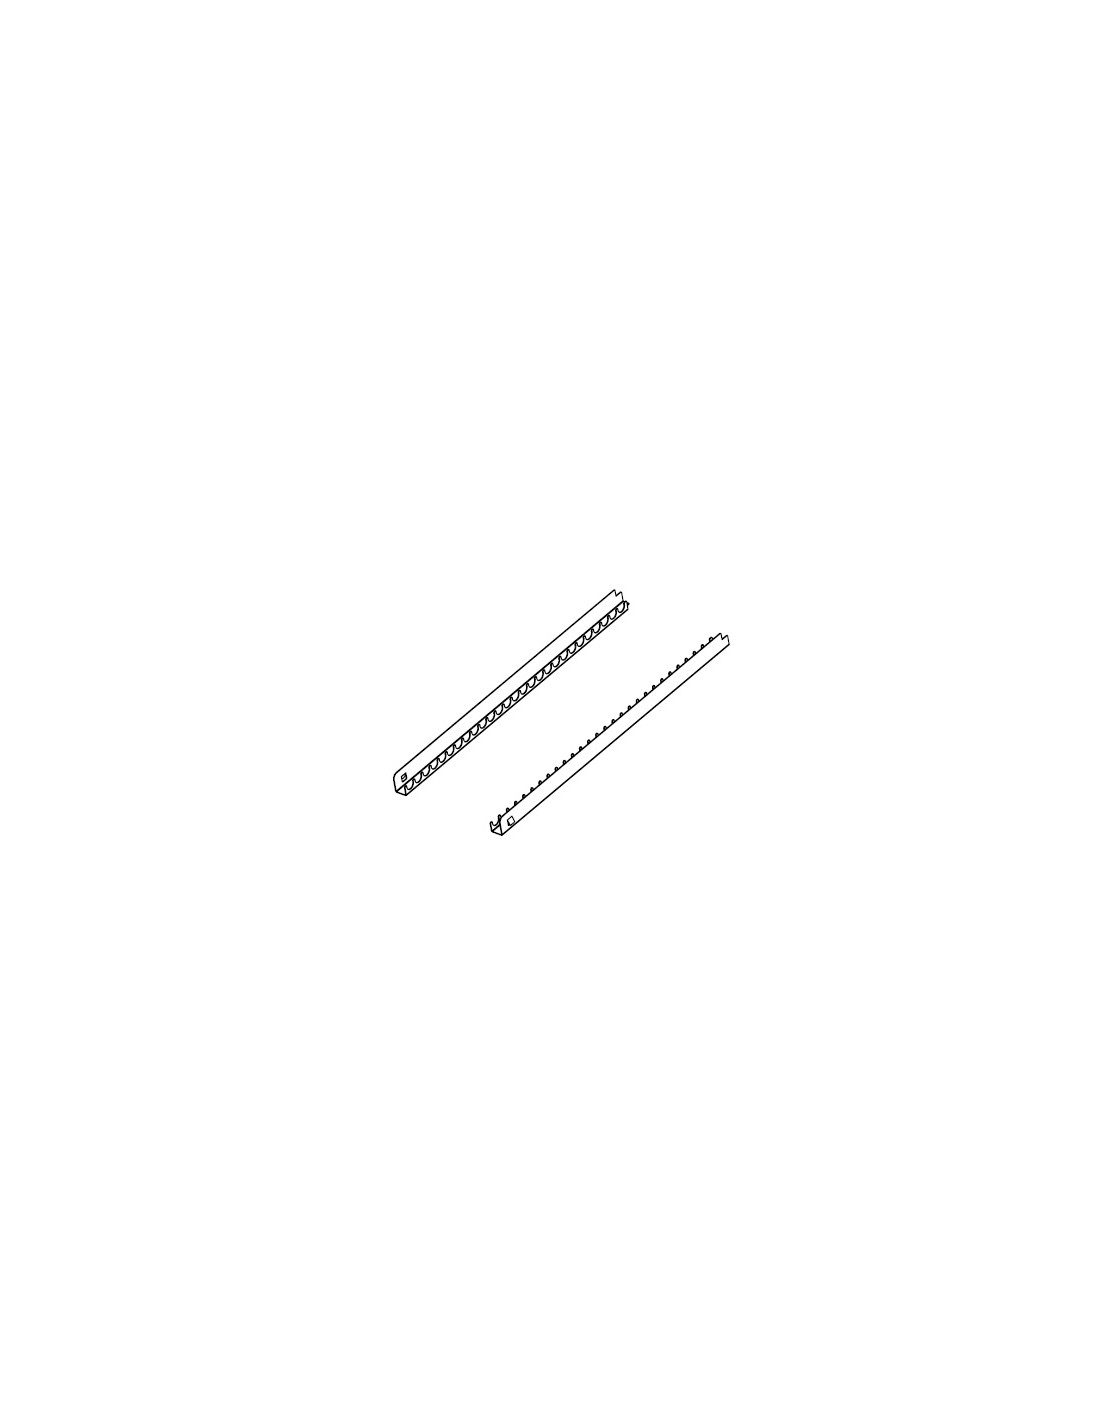 Pair of reinforced stainless steel runners for salami bars (55Kg)